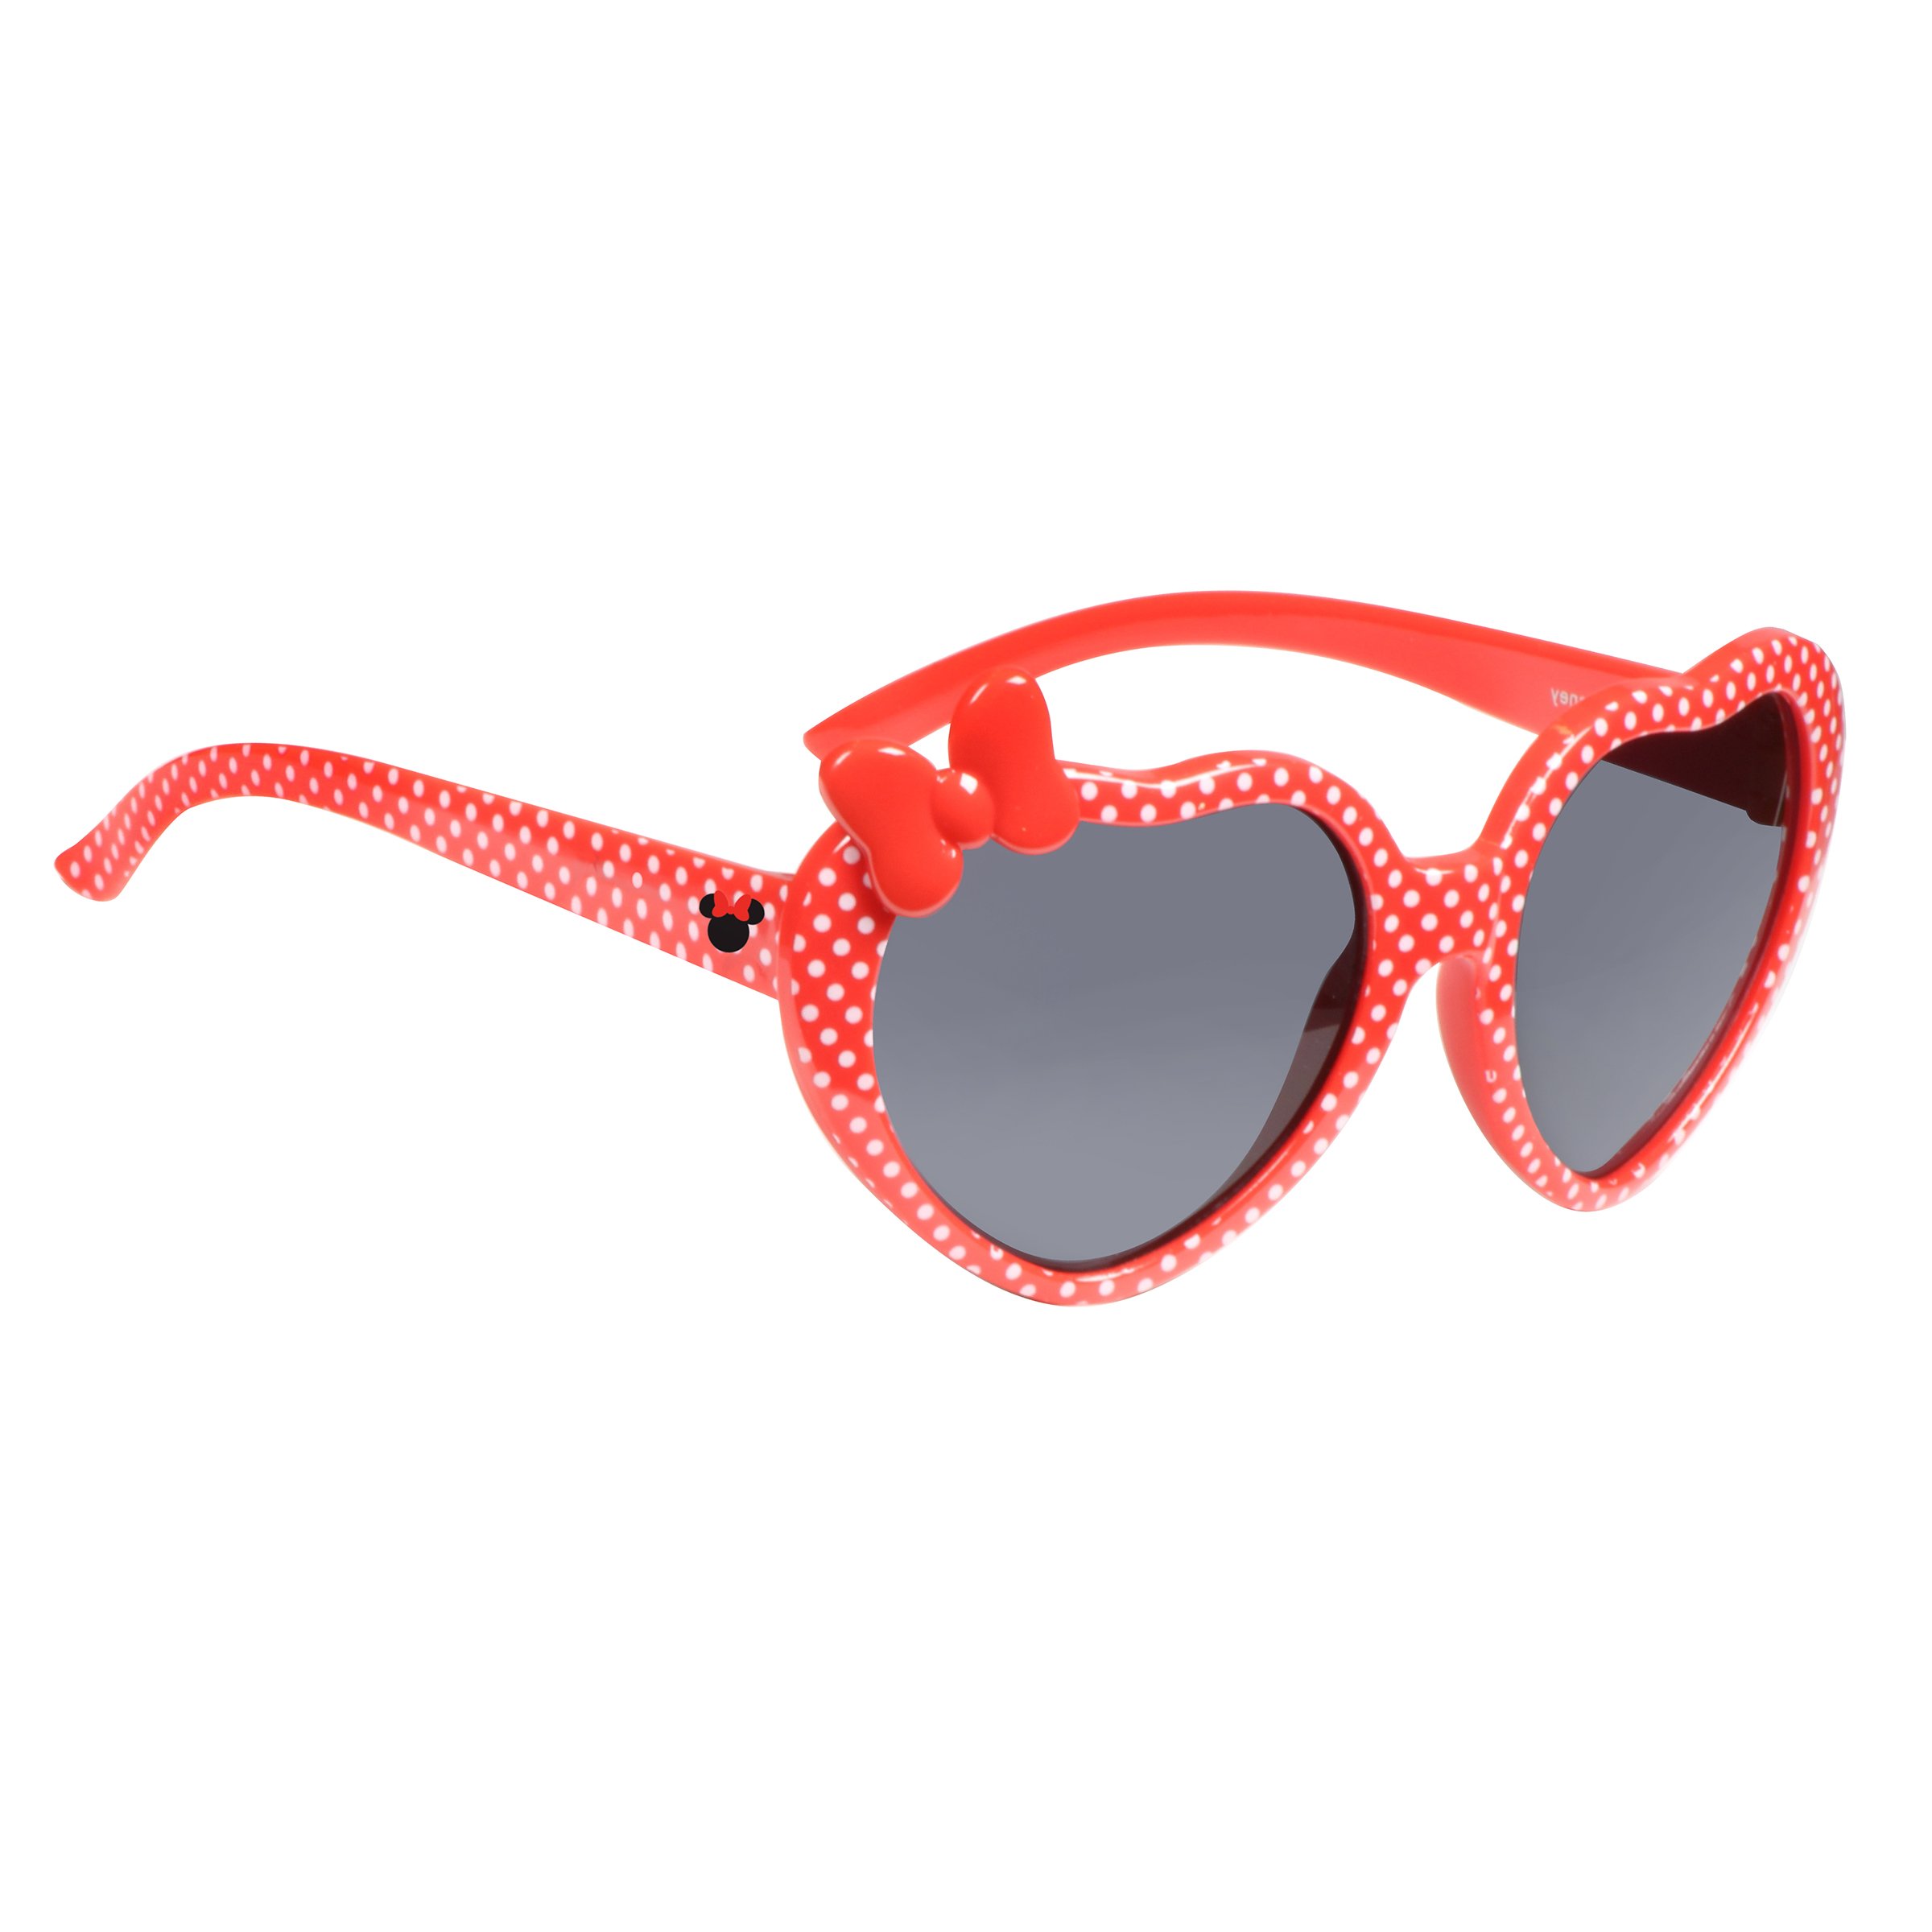 Select A Kids Disney Minnie Mouse Shaped Sunglasses - Eyewear & Accessories at